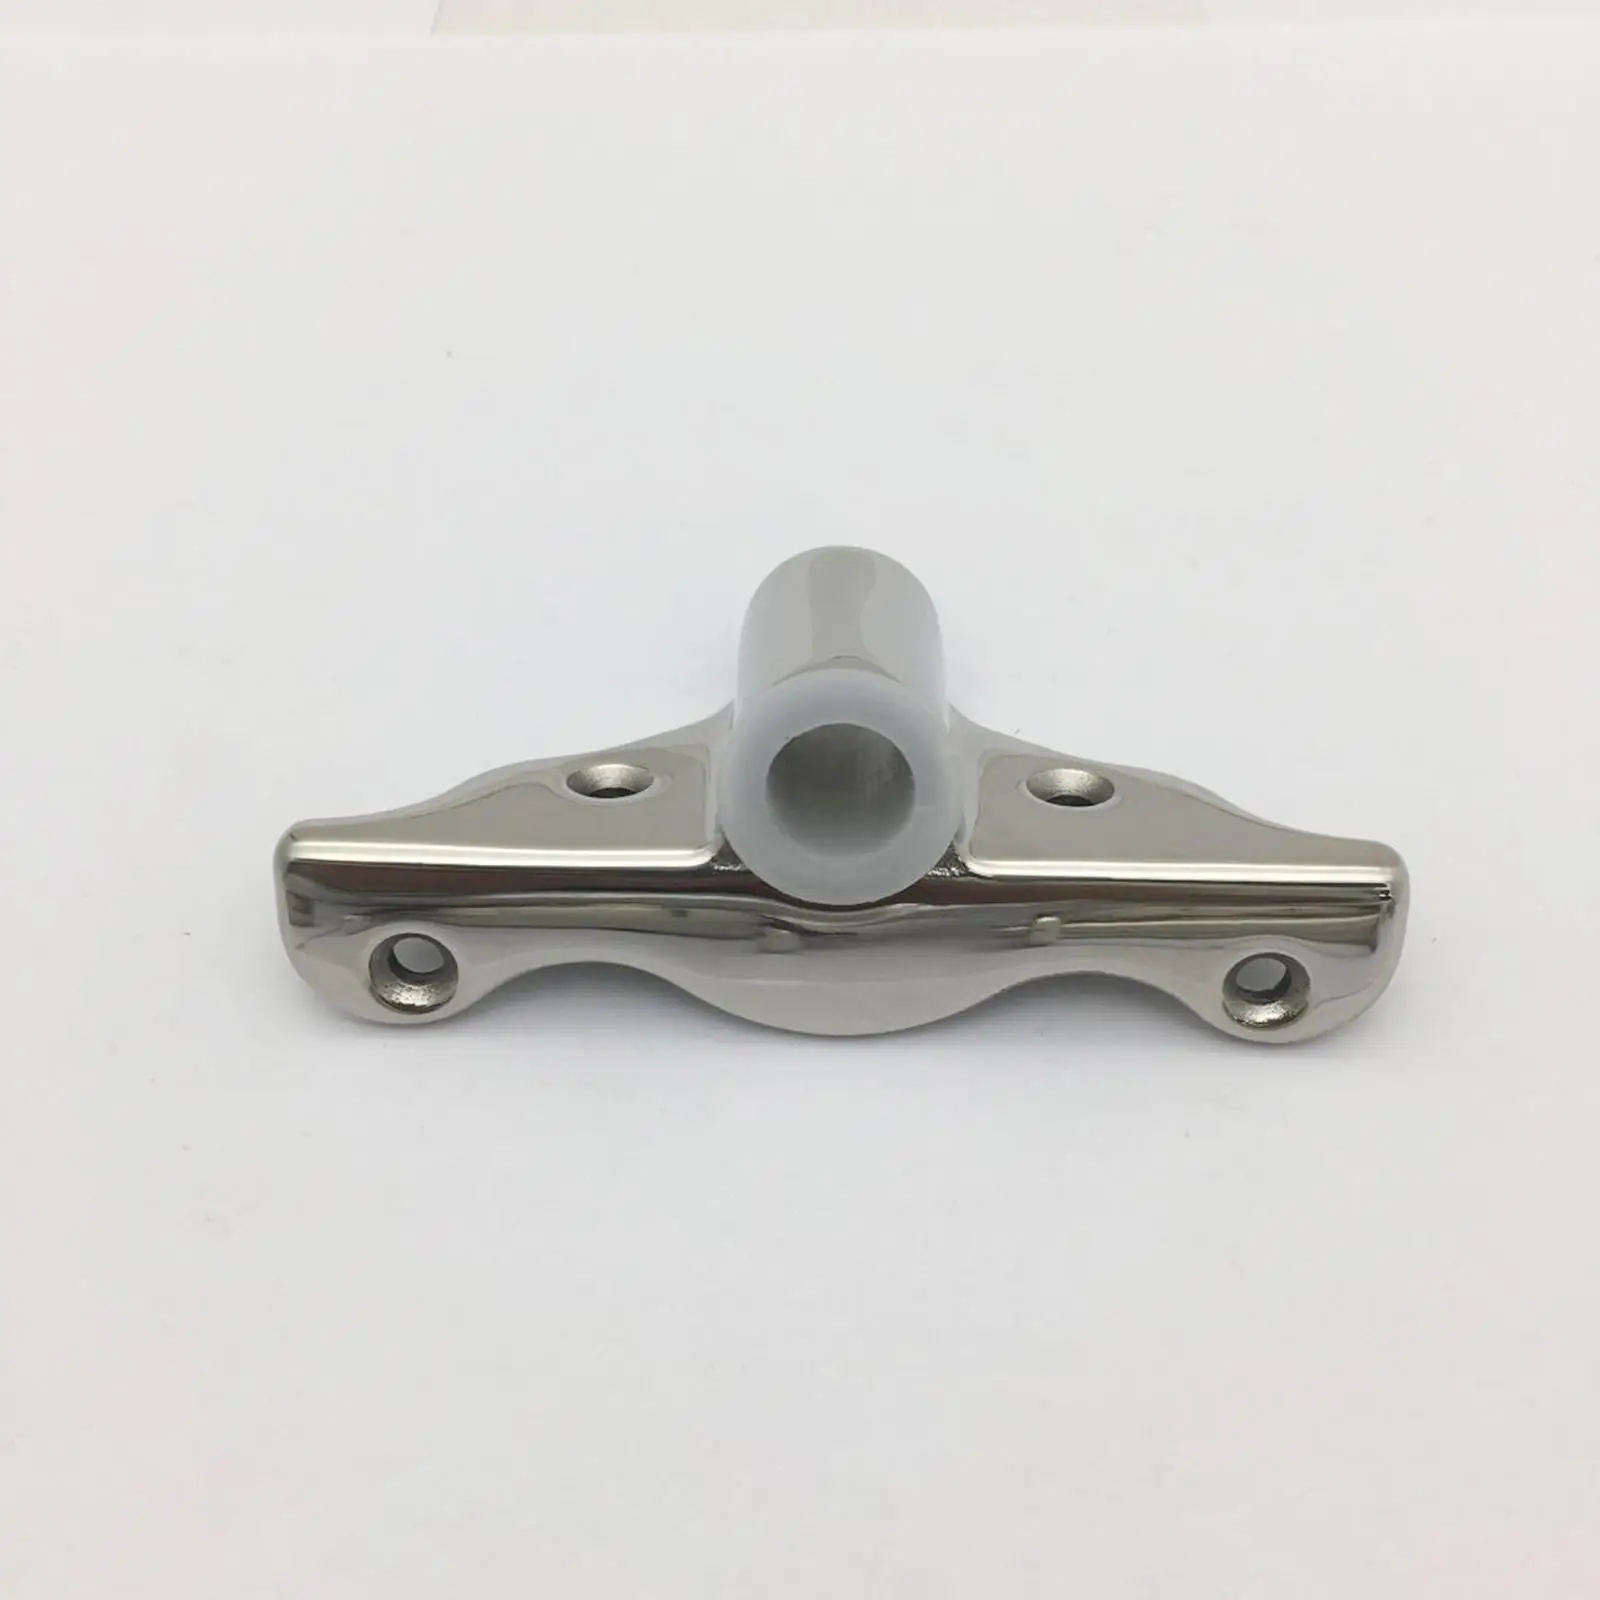 Side Mount Rowlock Oarlock Support Bracket Stainless Steel Easily Install for Sailing Deck Hardware 1/2 Inches Canoe Accessories